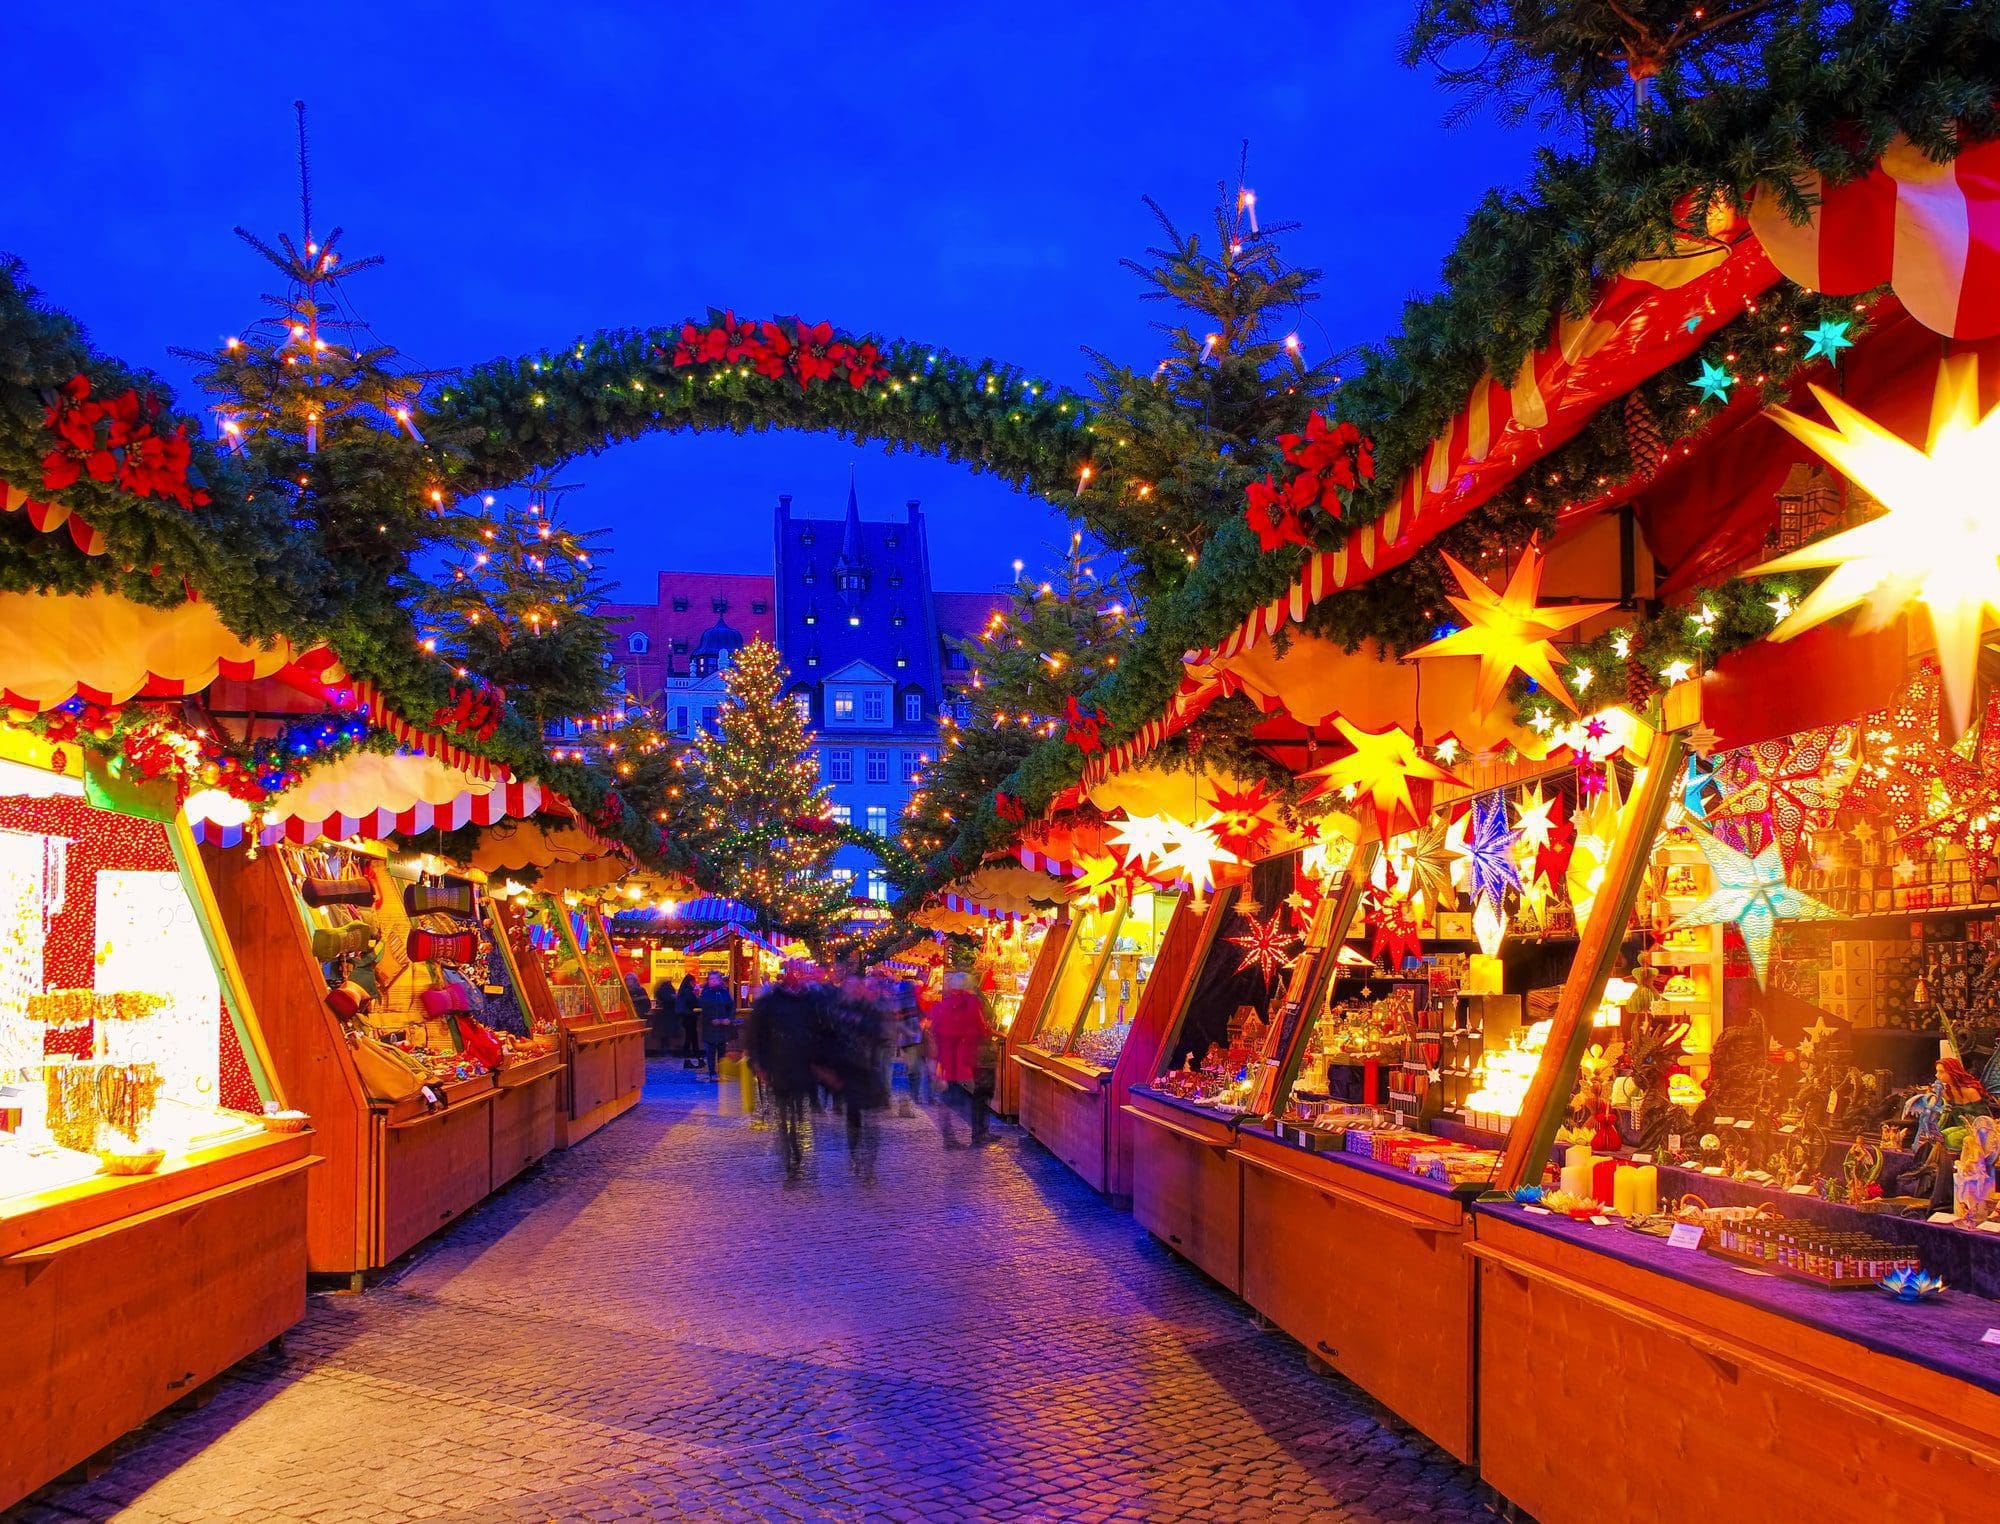 Leipzig Christmas market in the evening